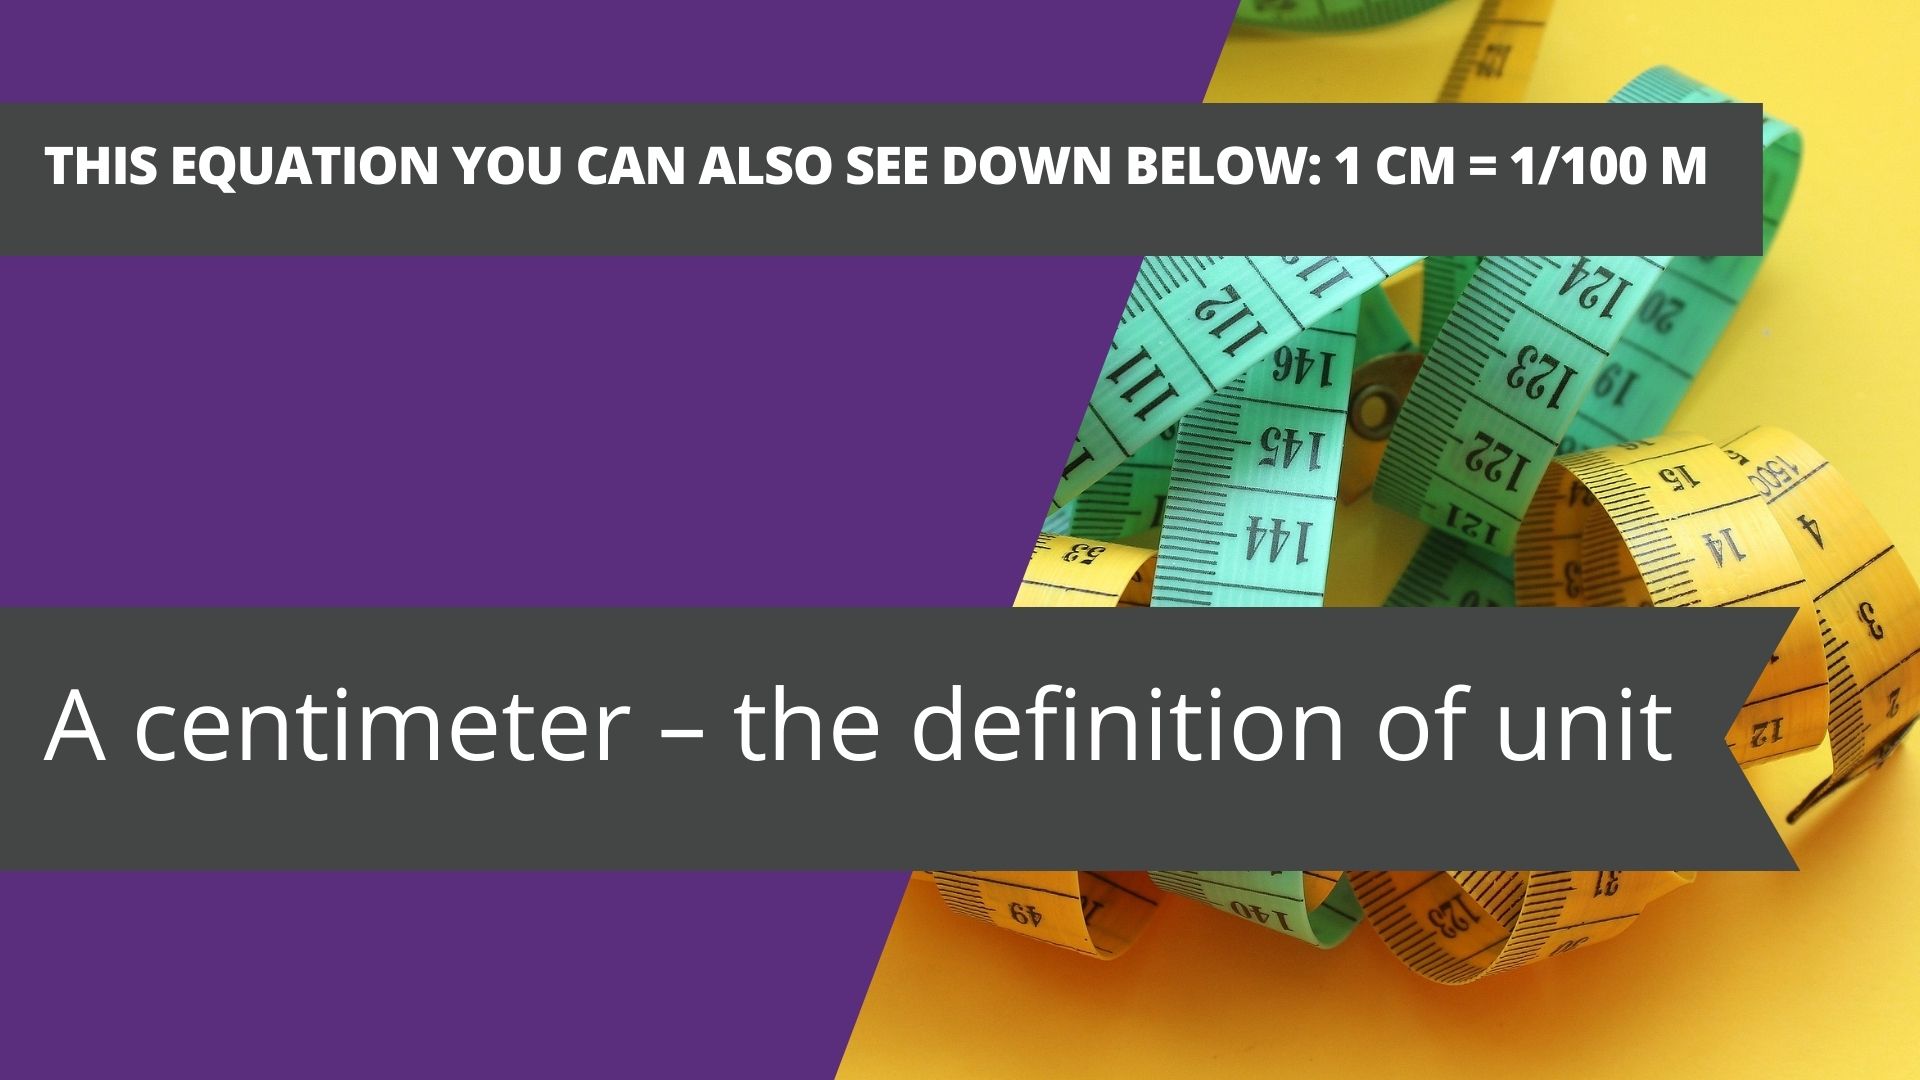 A centimeter – the definition of unit